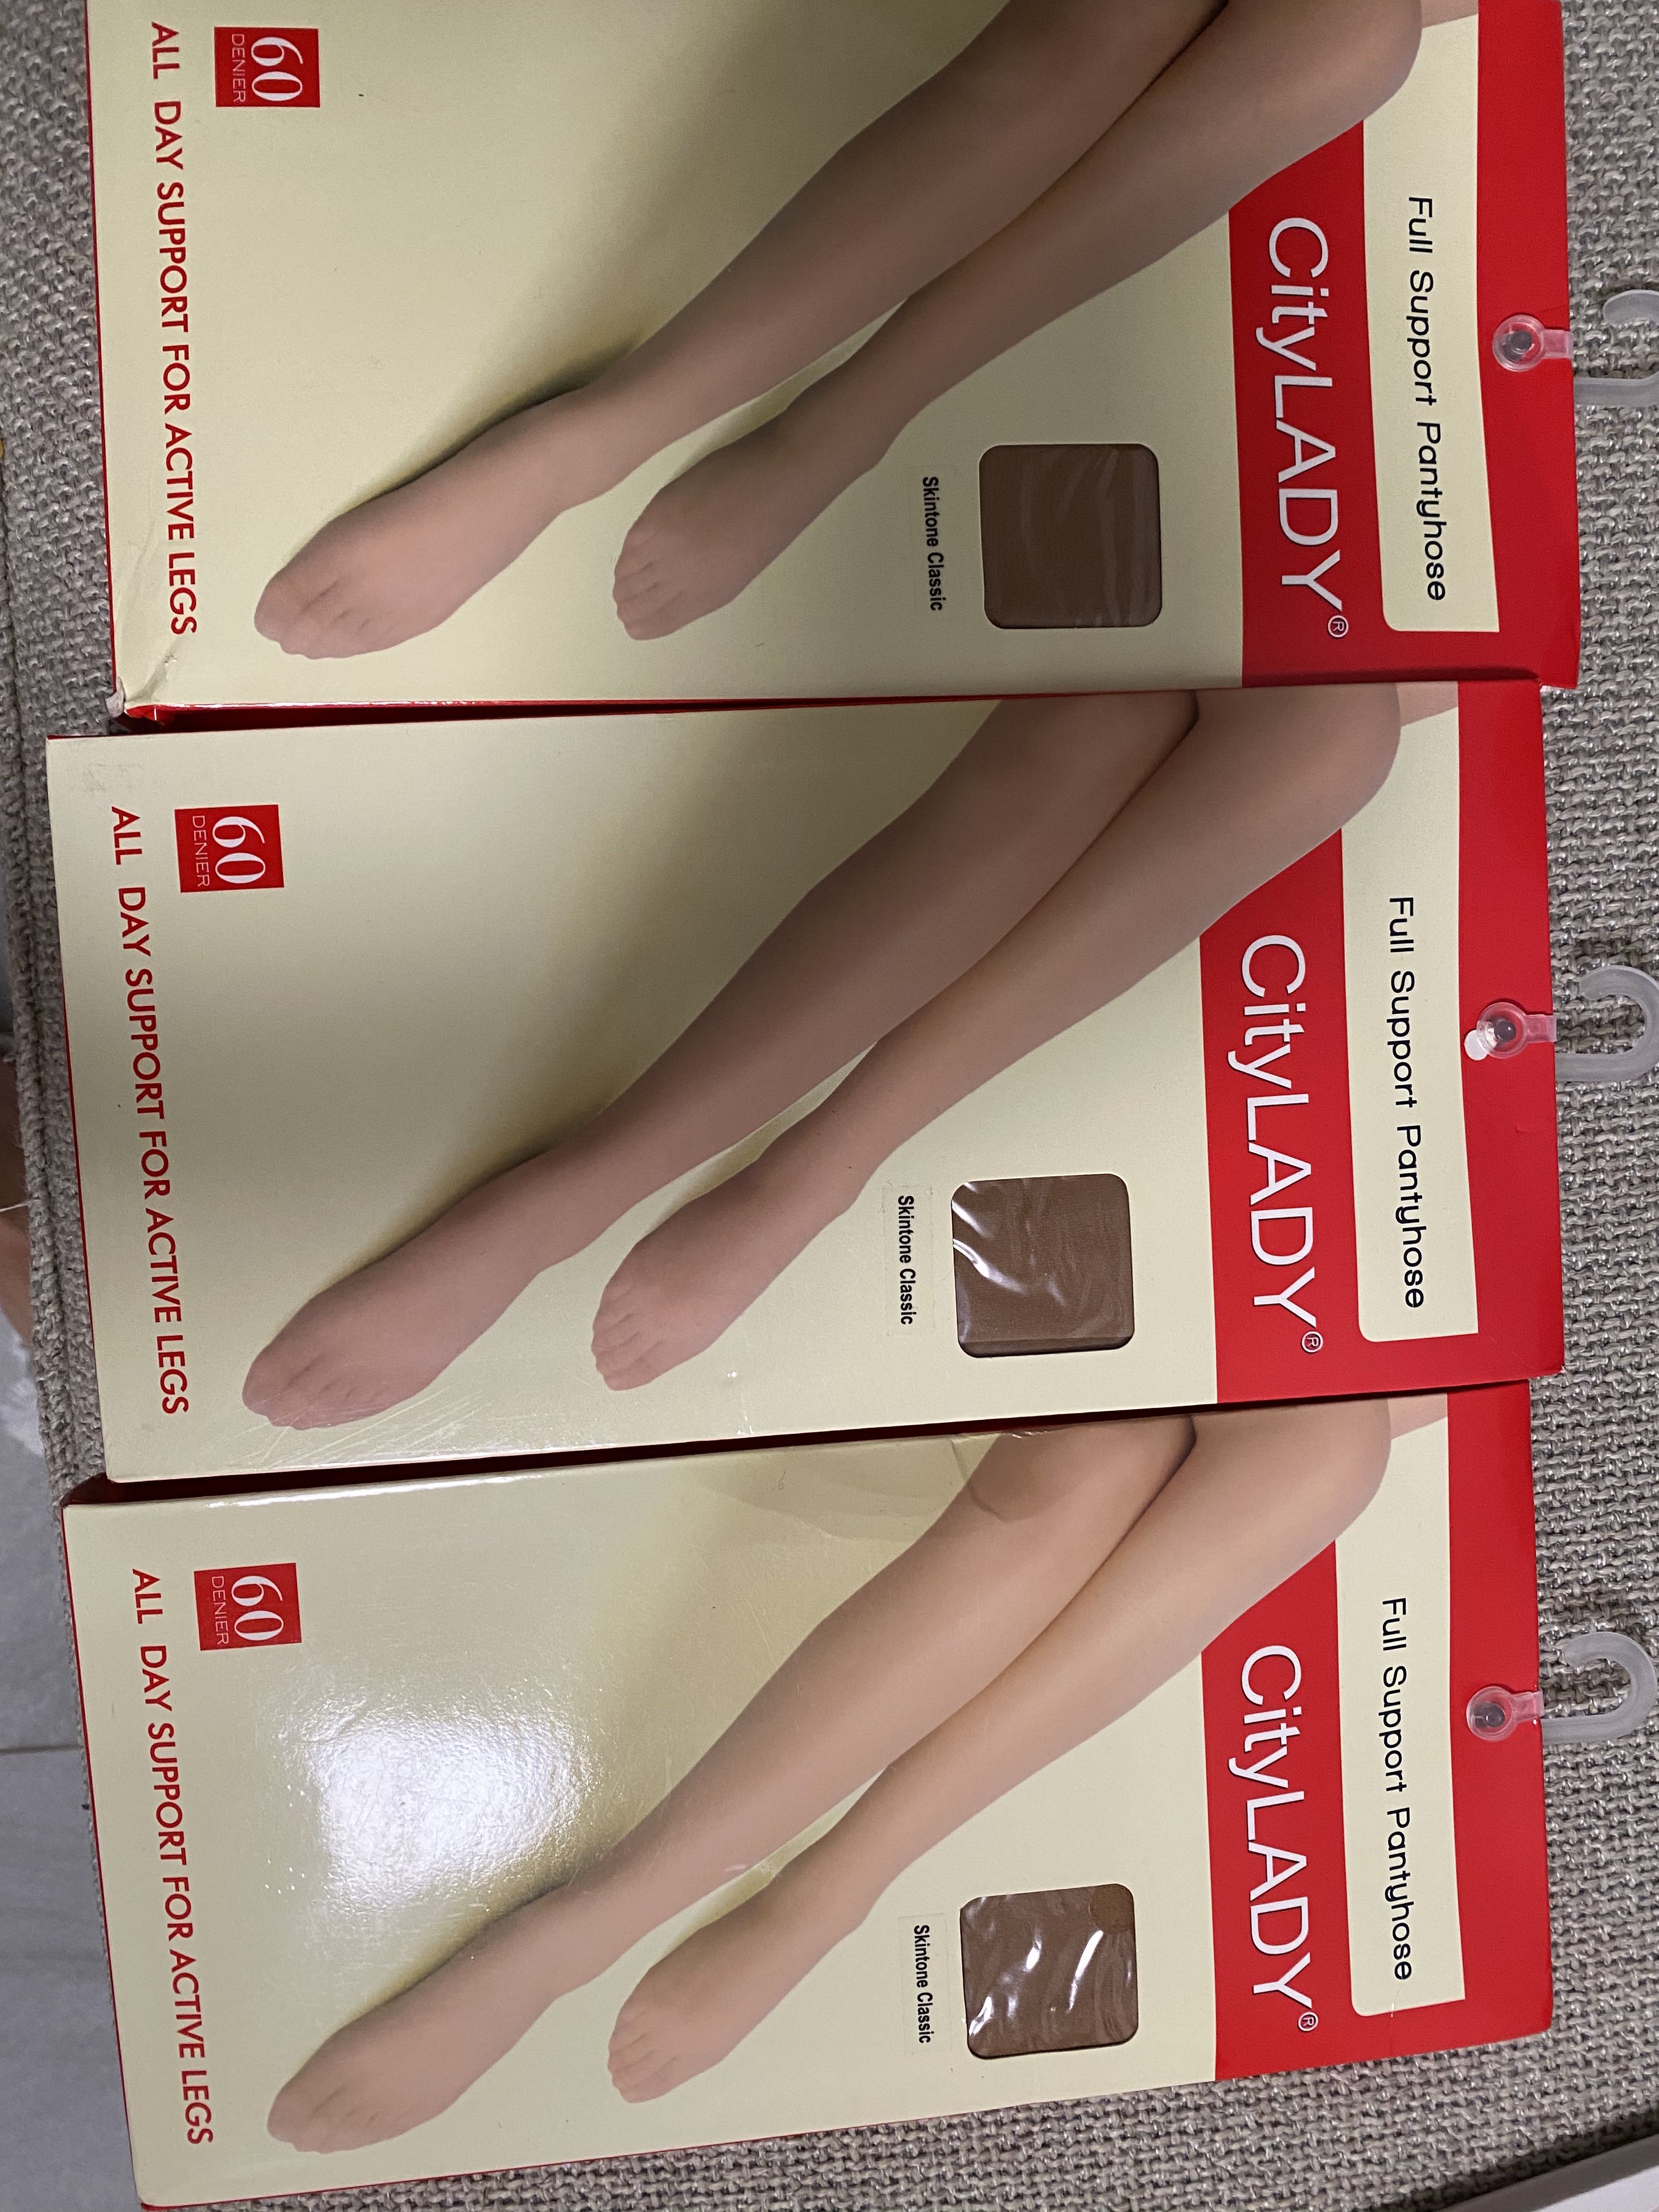 Stockings Panty Hose Women S Fashion New Undergarments And Loungewear On Carousell